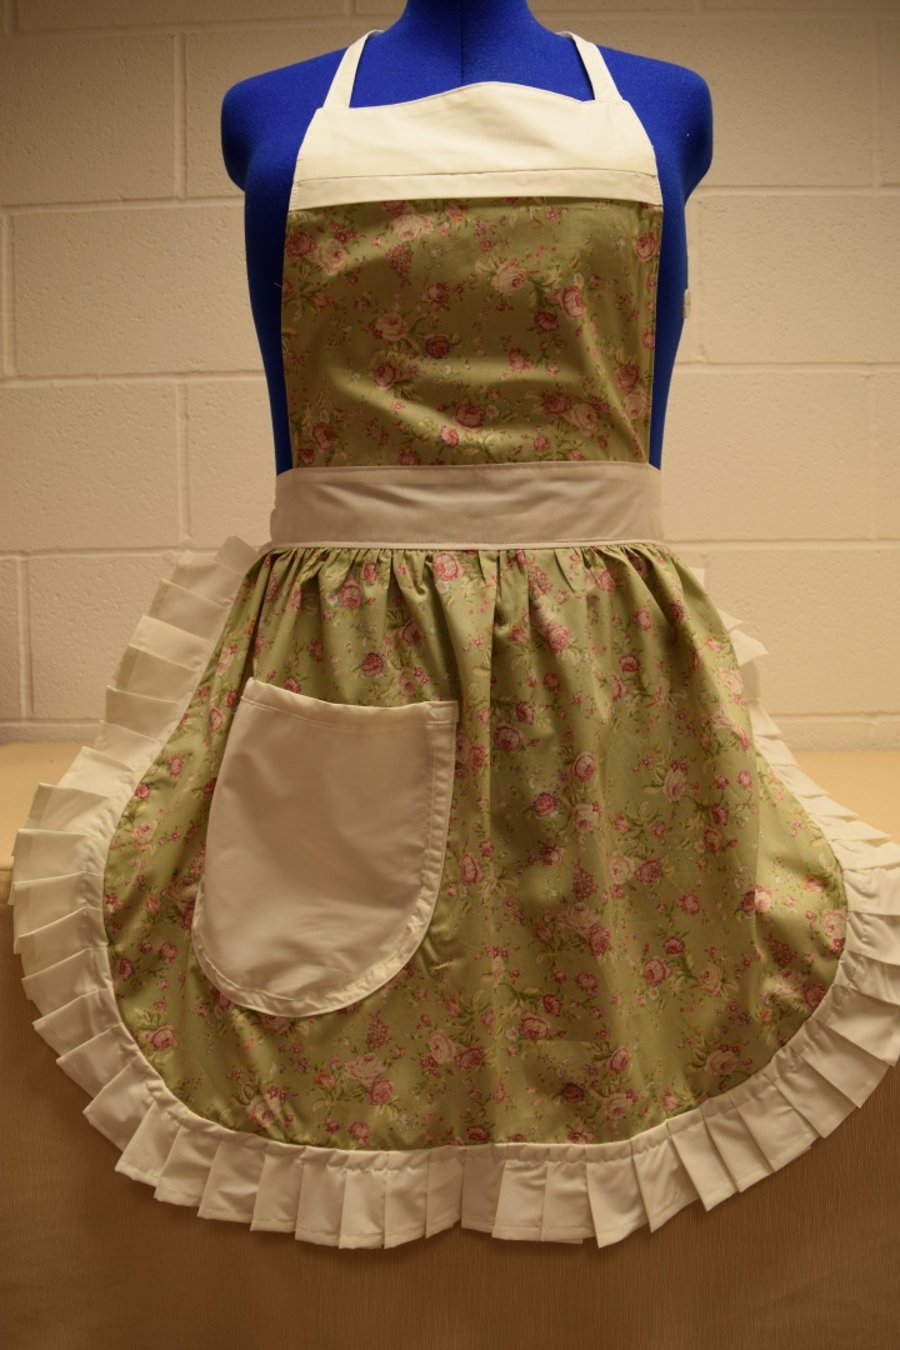 Vintage 50s Style Full Apron Pinny - Pale Green Floral with Cream Trim